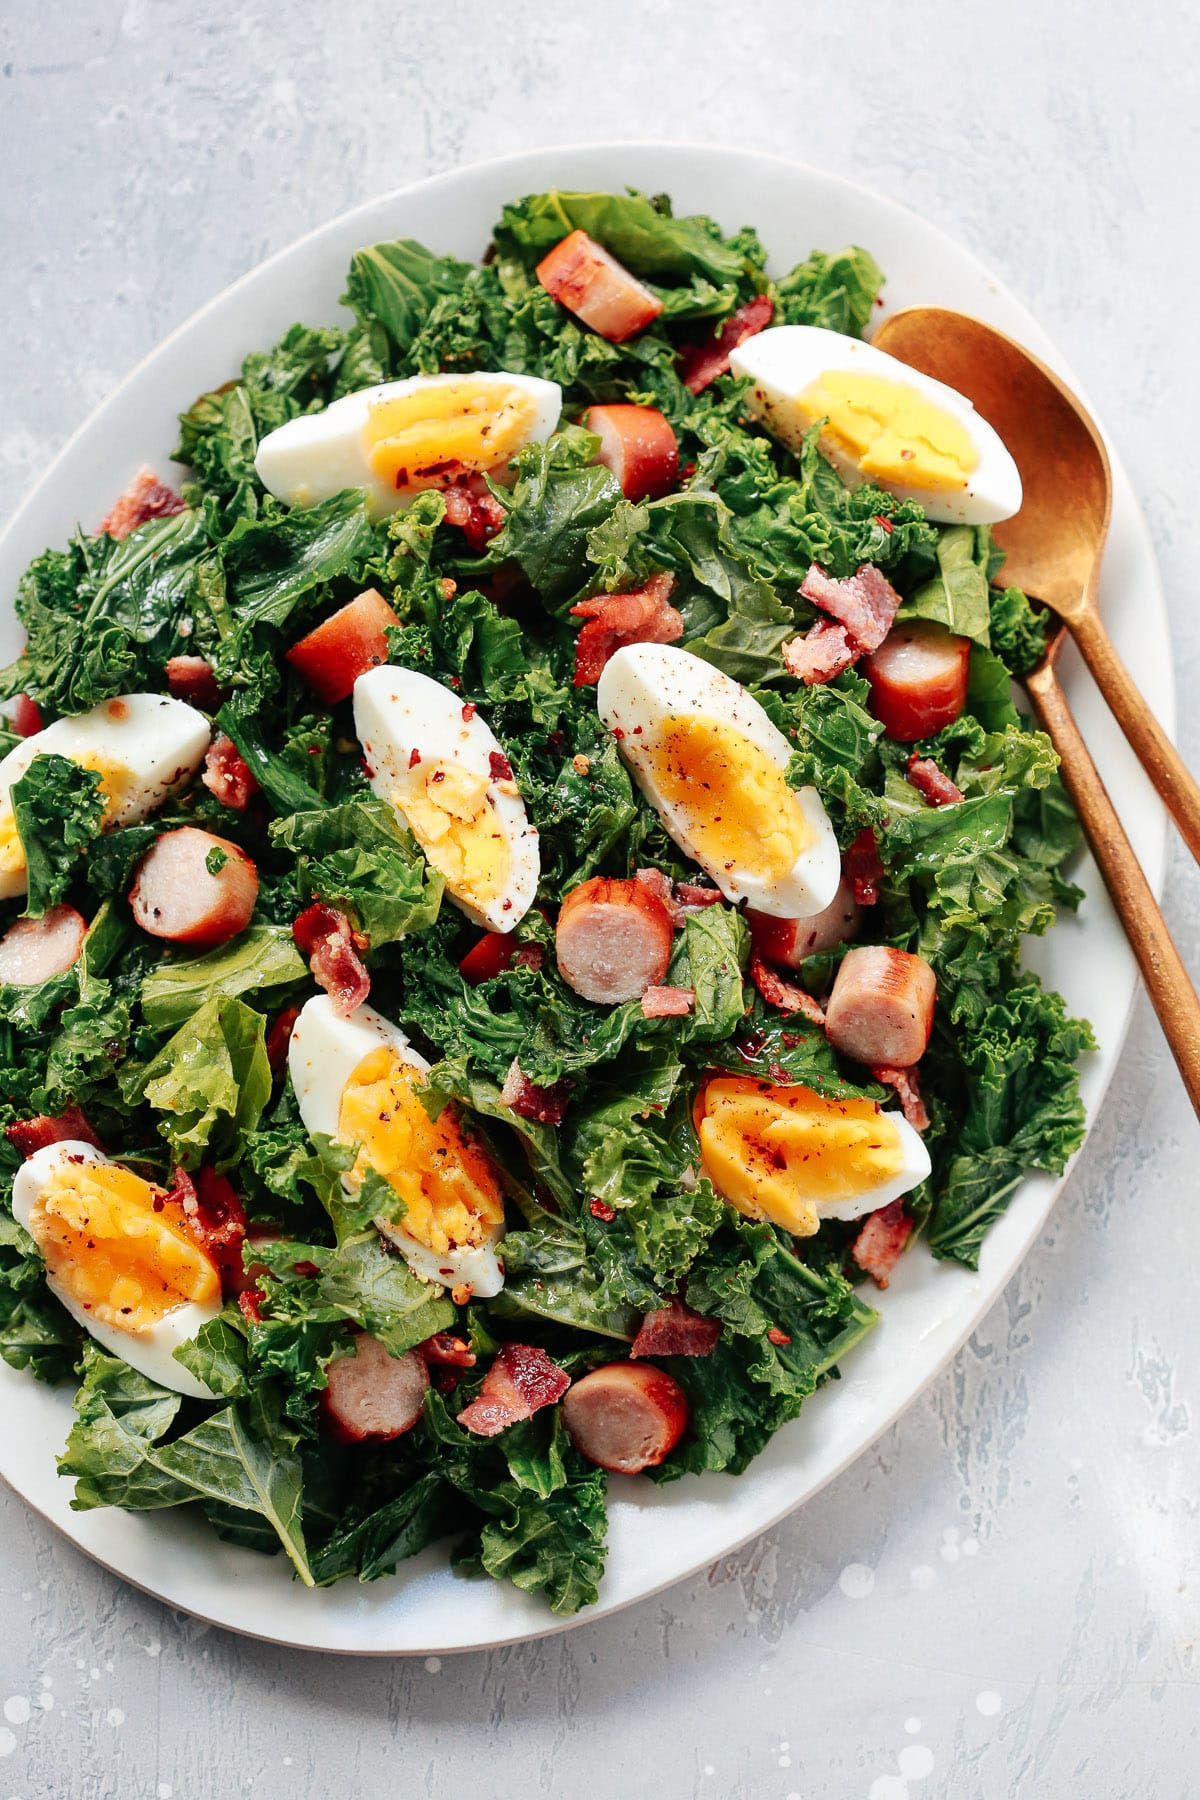 Breakfast Salad Recipes
 Easy Kale Breakfast Salad Low carb and Whole30